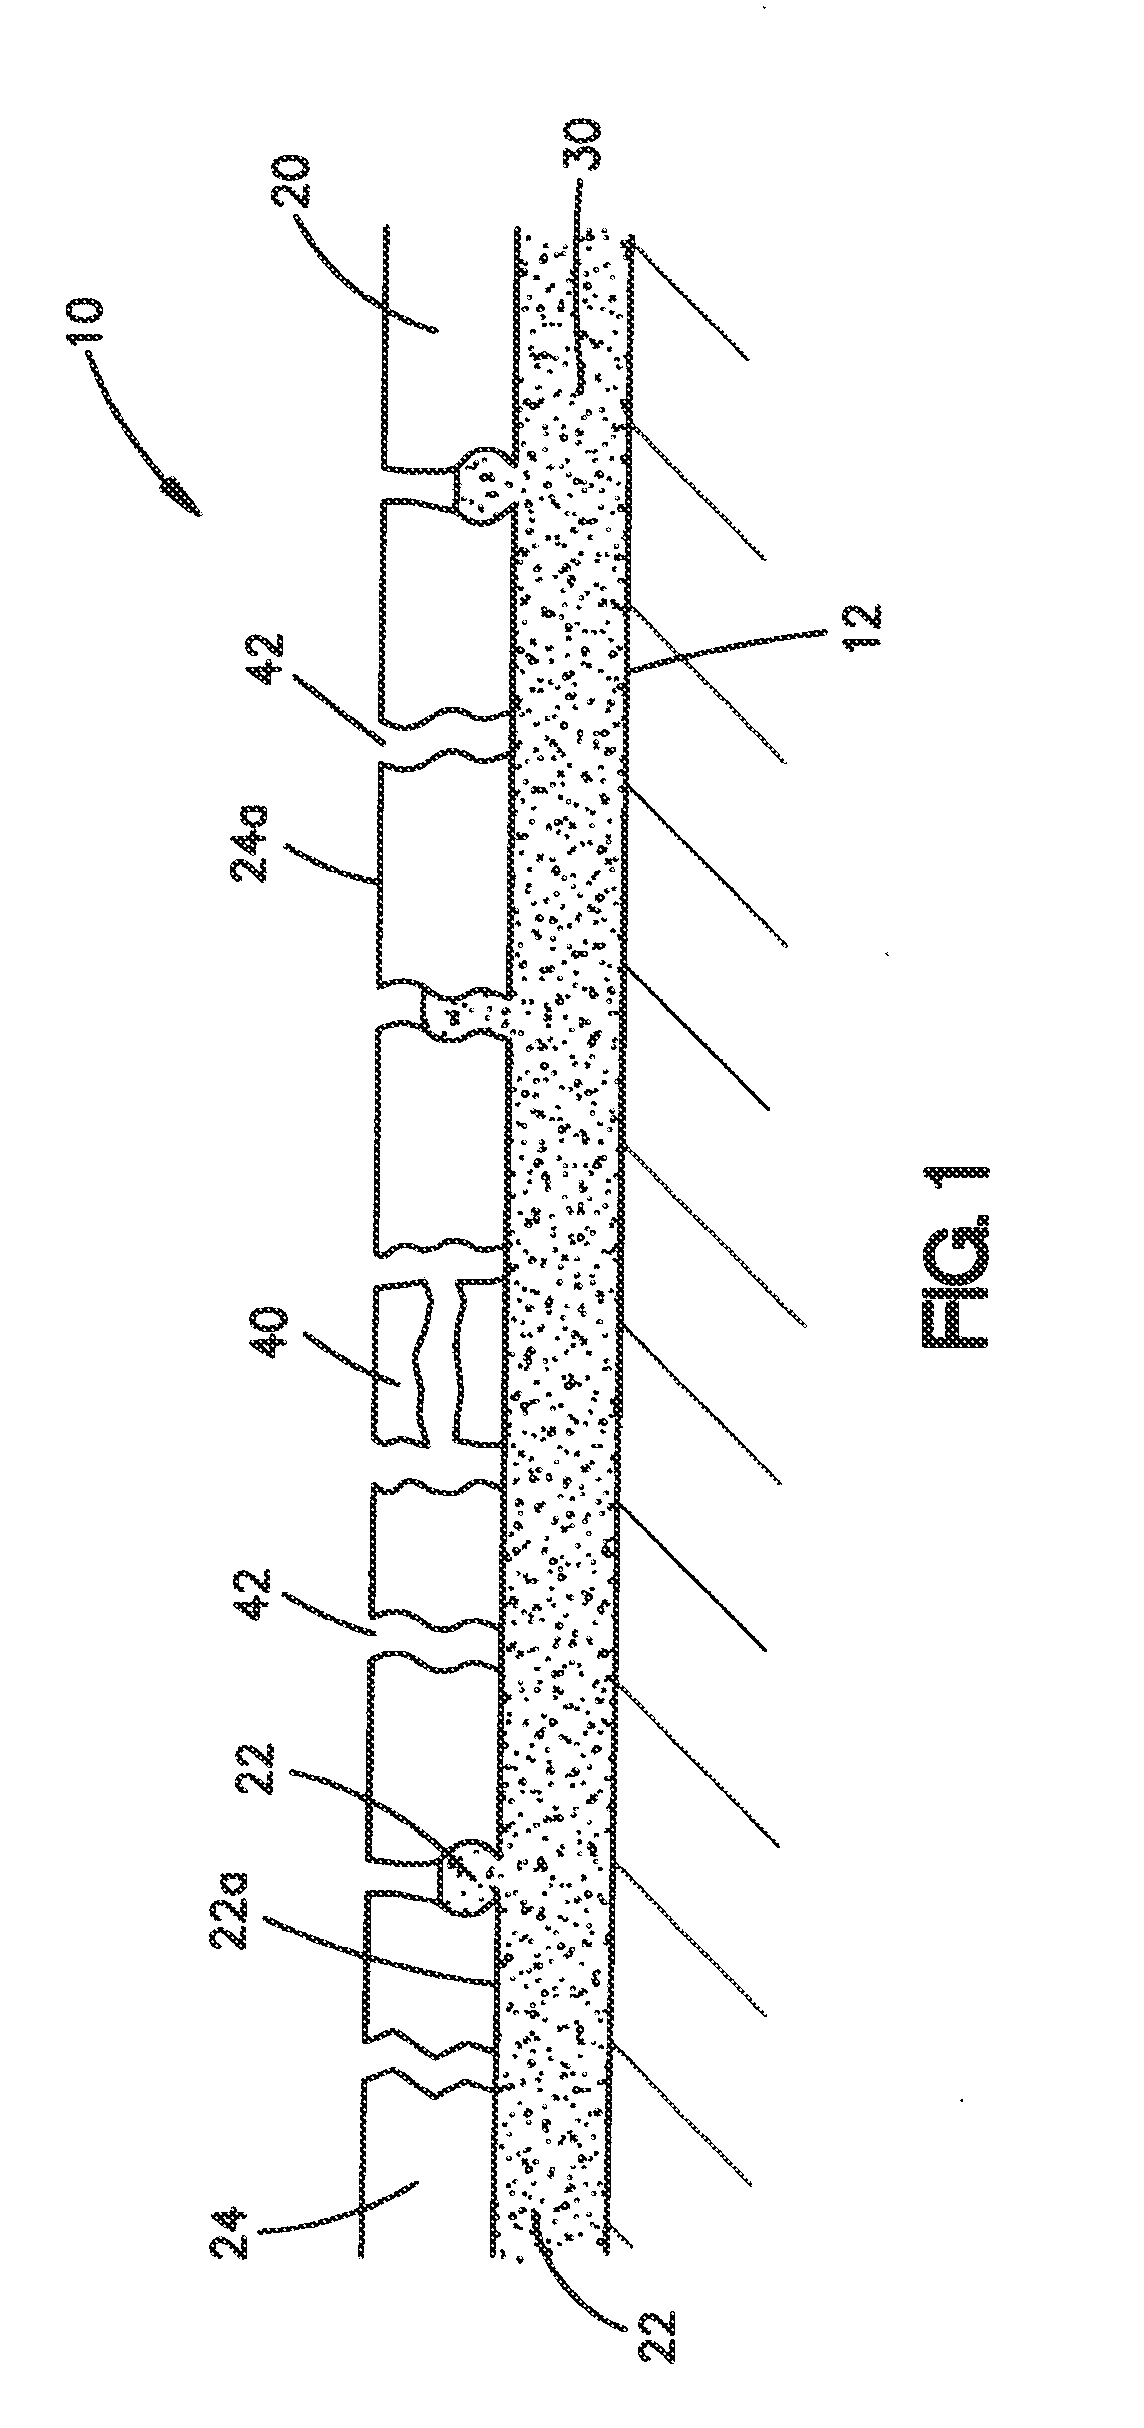 Coatings for Medical Devices Comprising a Therapeutic Agent and a  Metallic Material